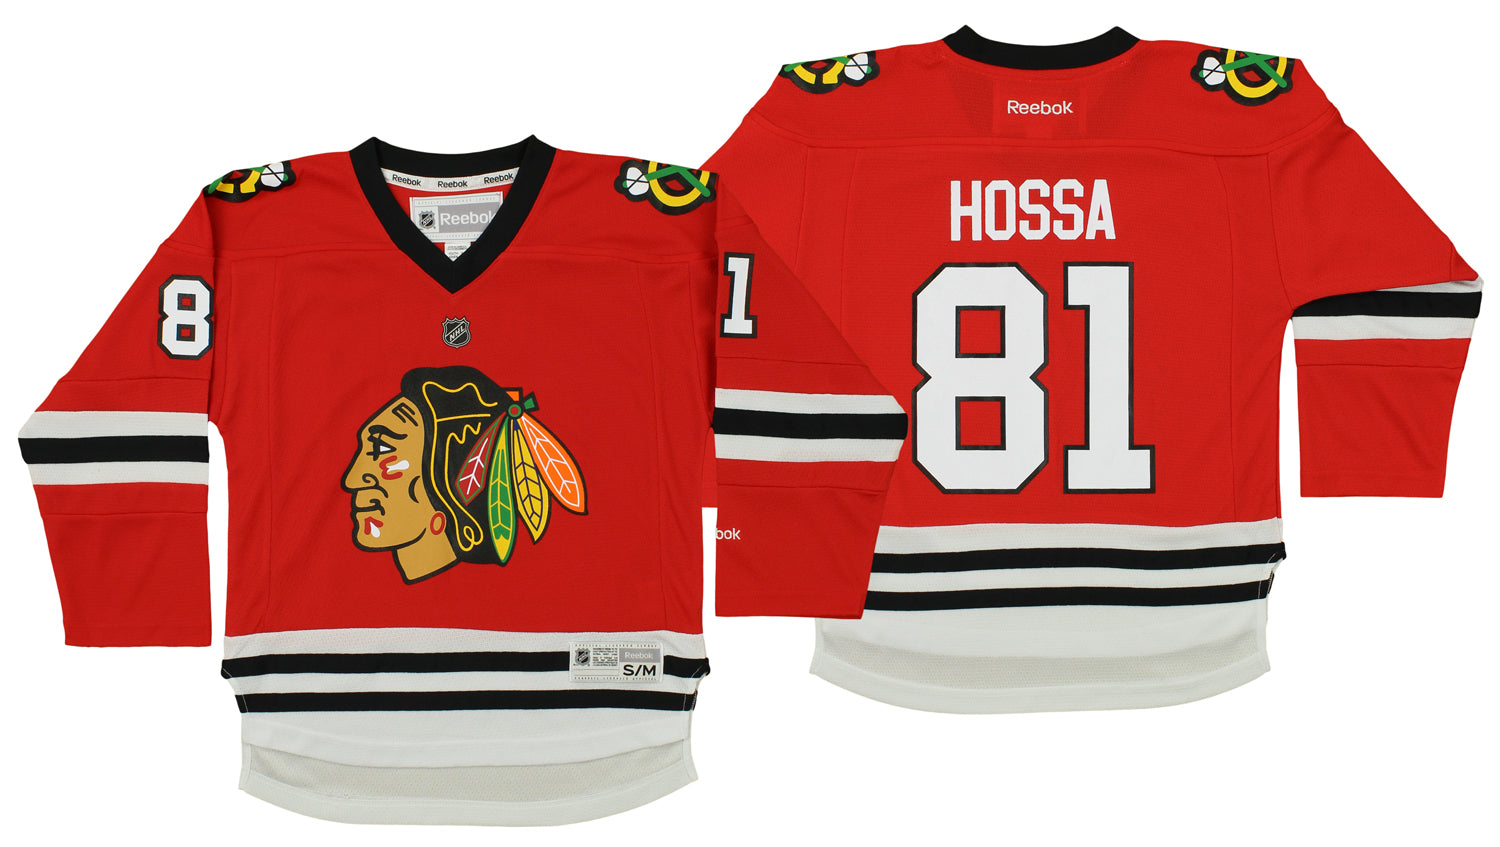 Blackhawks Game Worn Jersey of the Week on X: Hossa's #81 to be